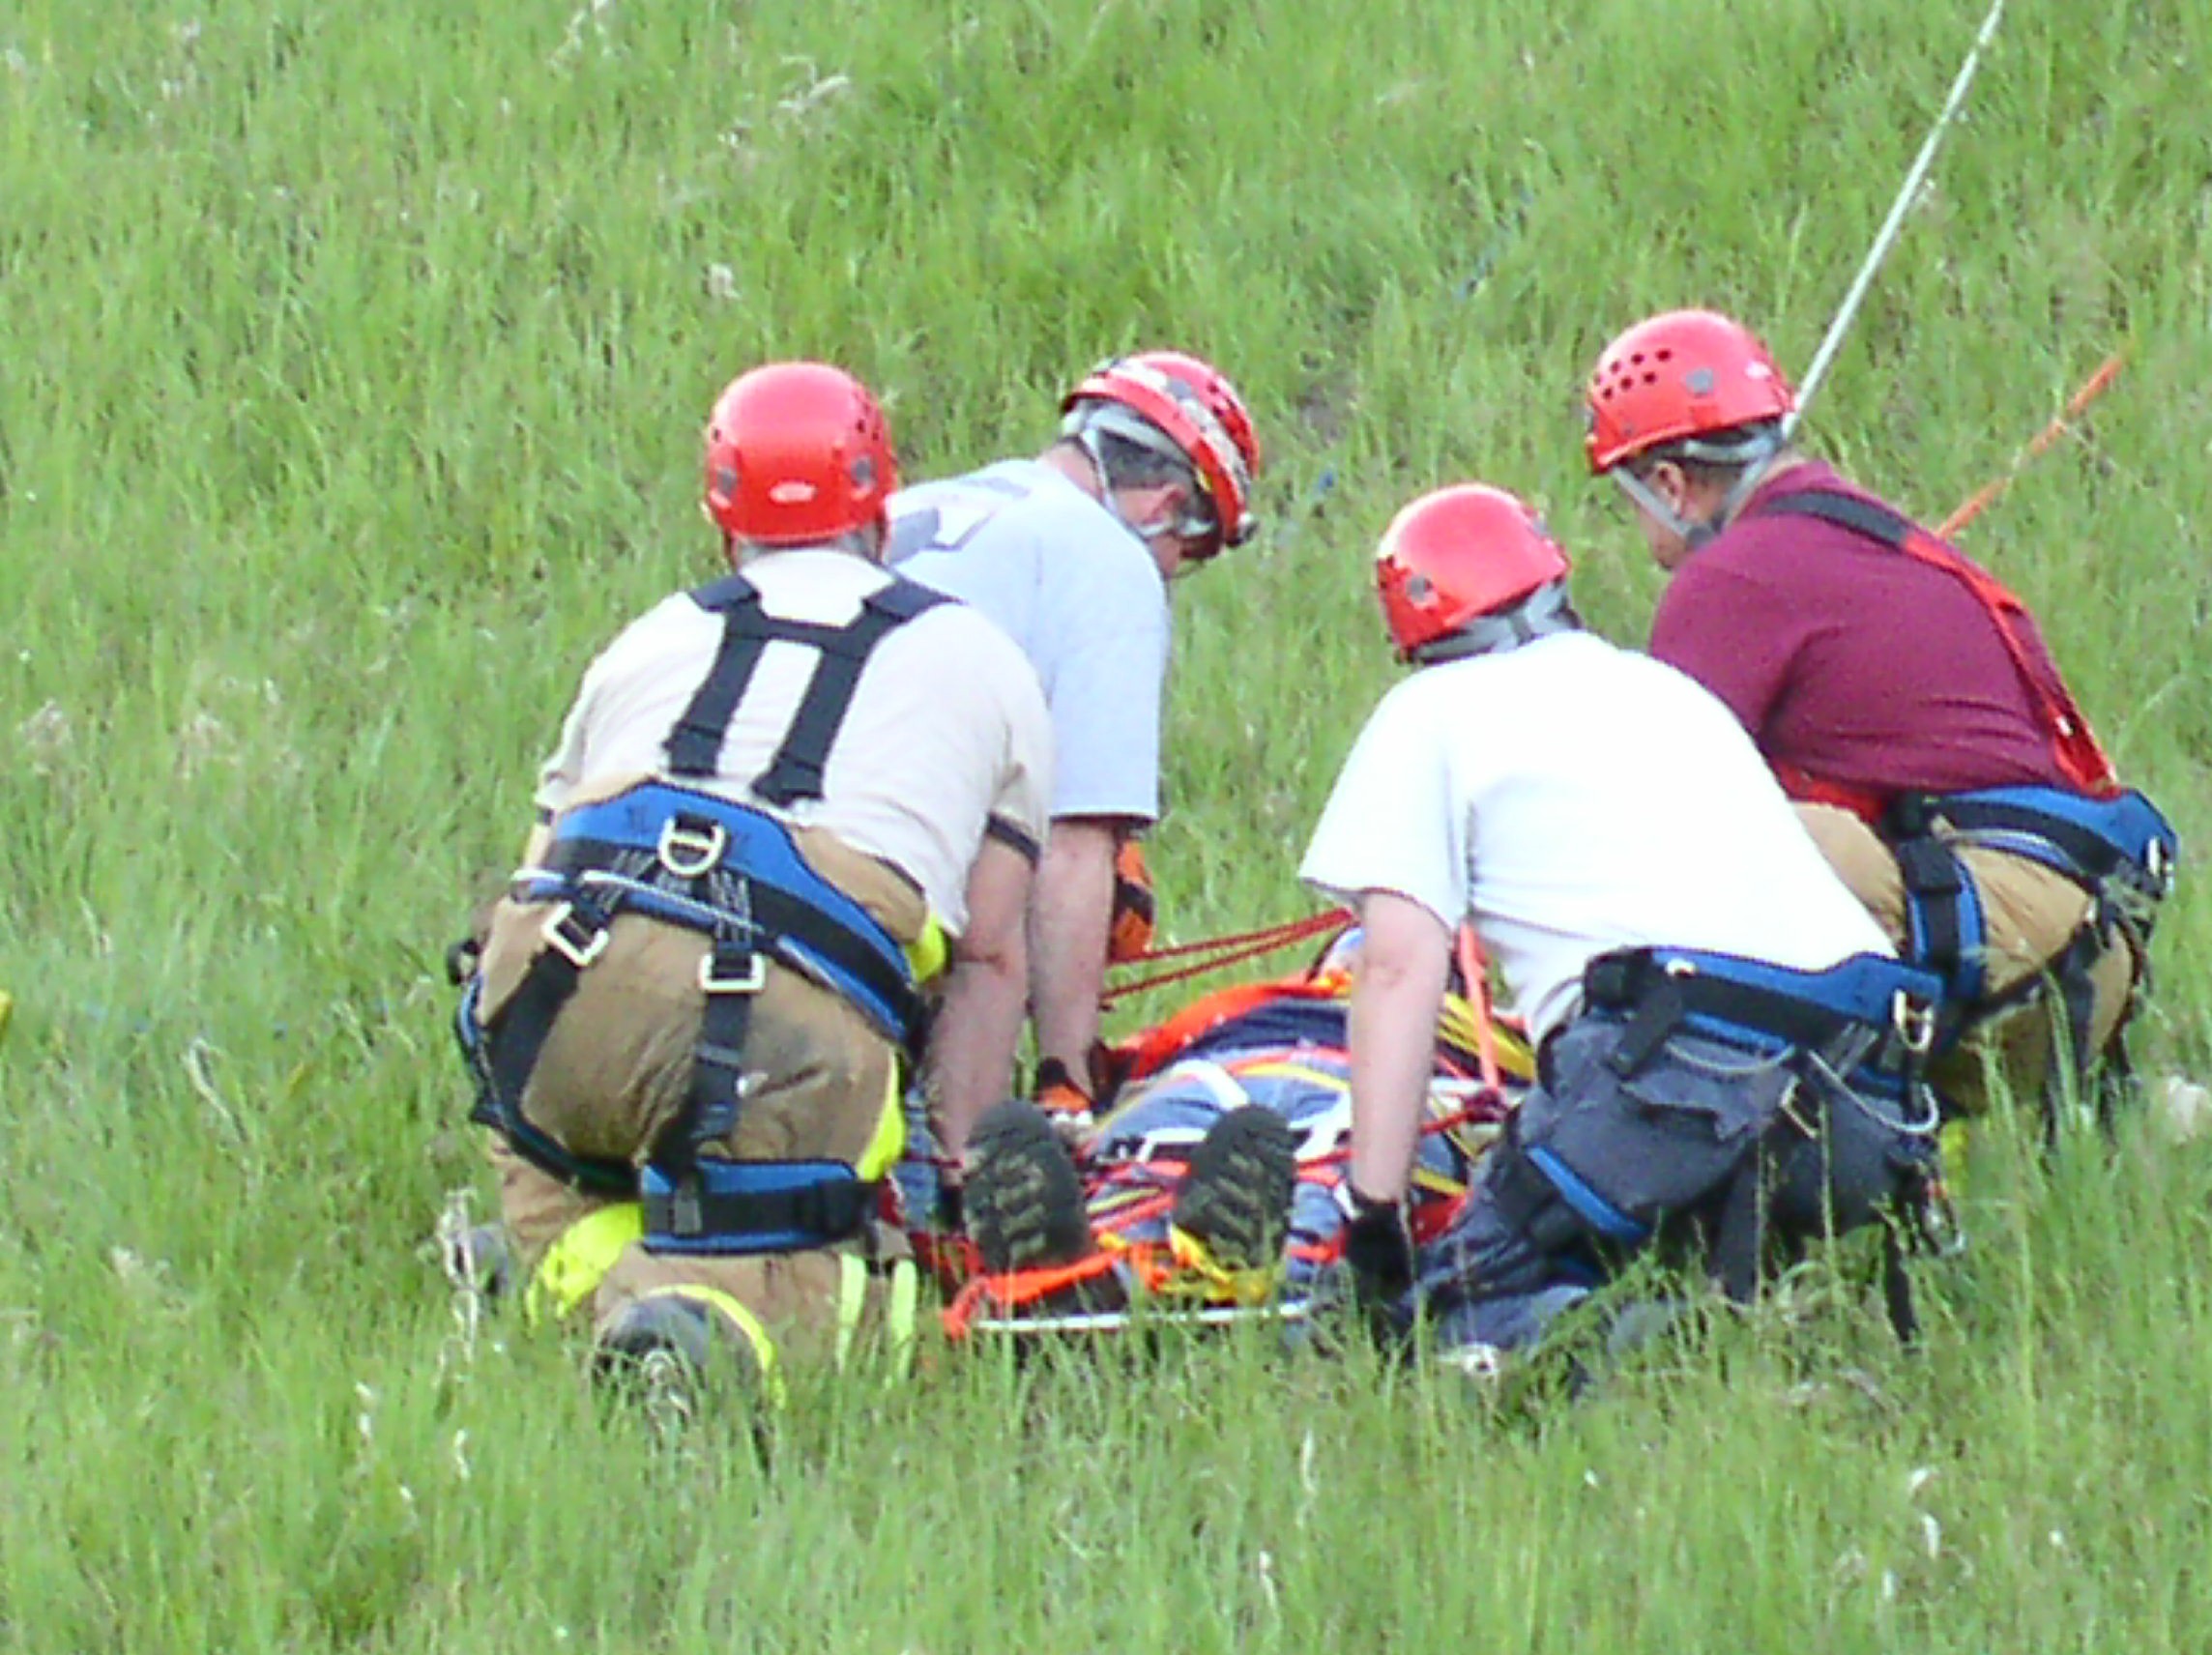 05-31-05  Training - Rope Rescue With Union Center